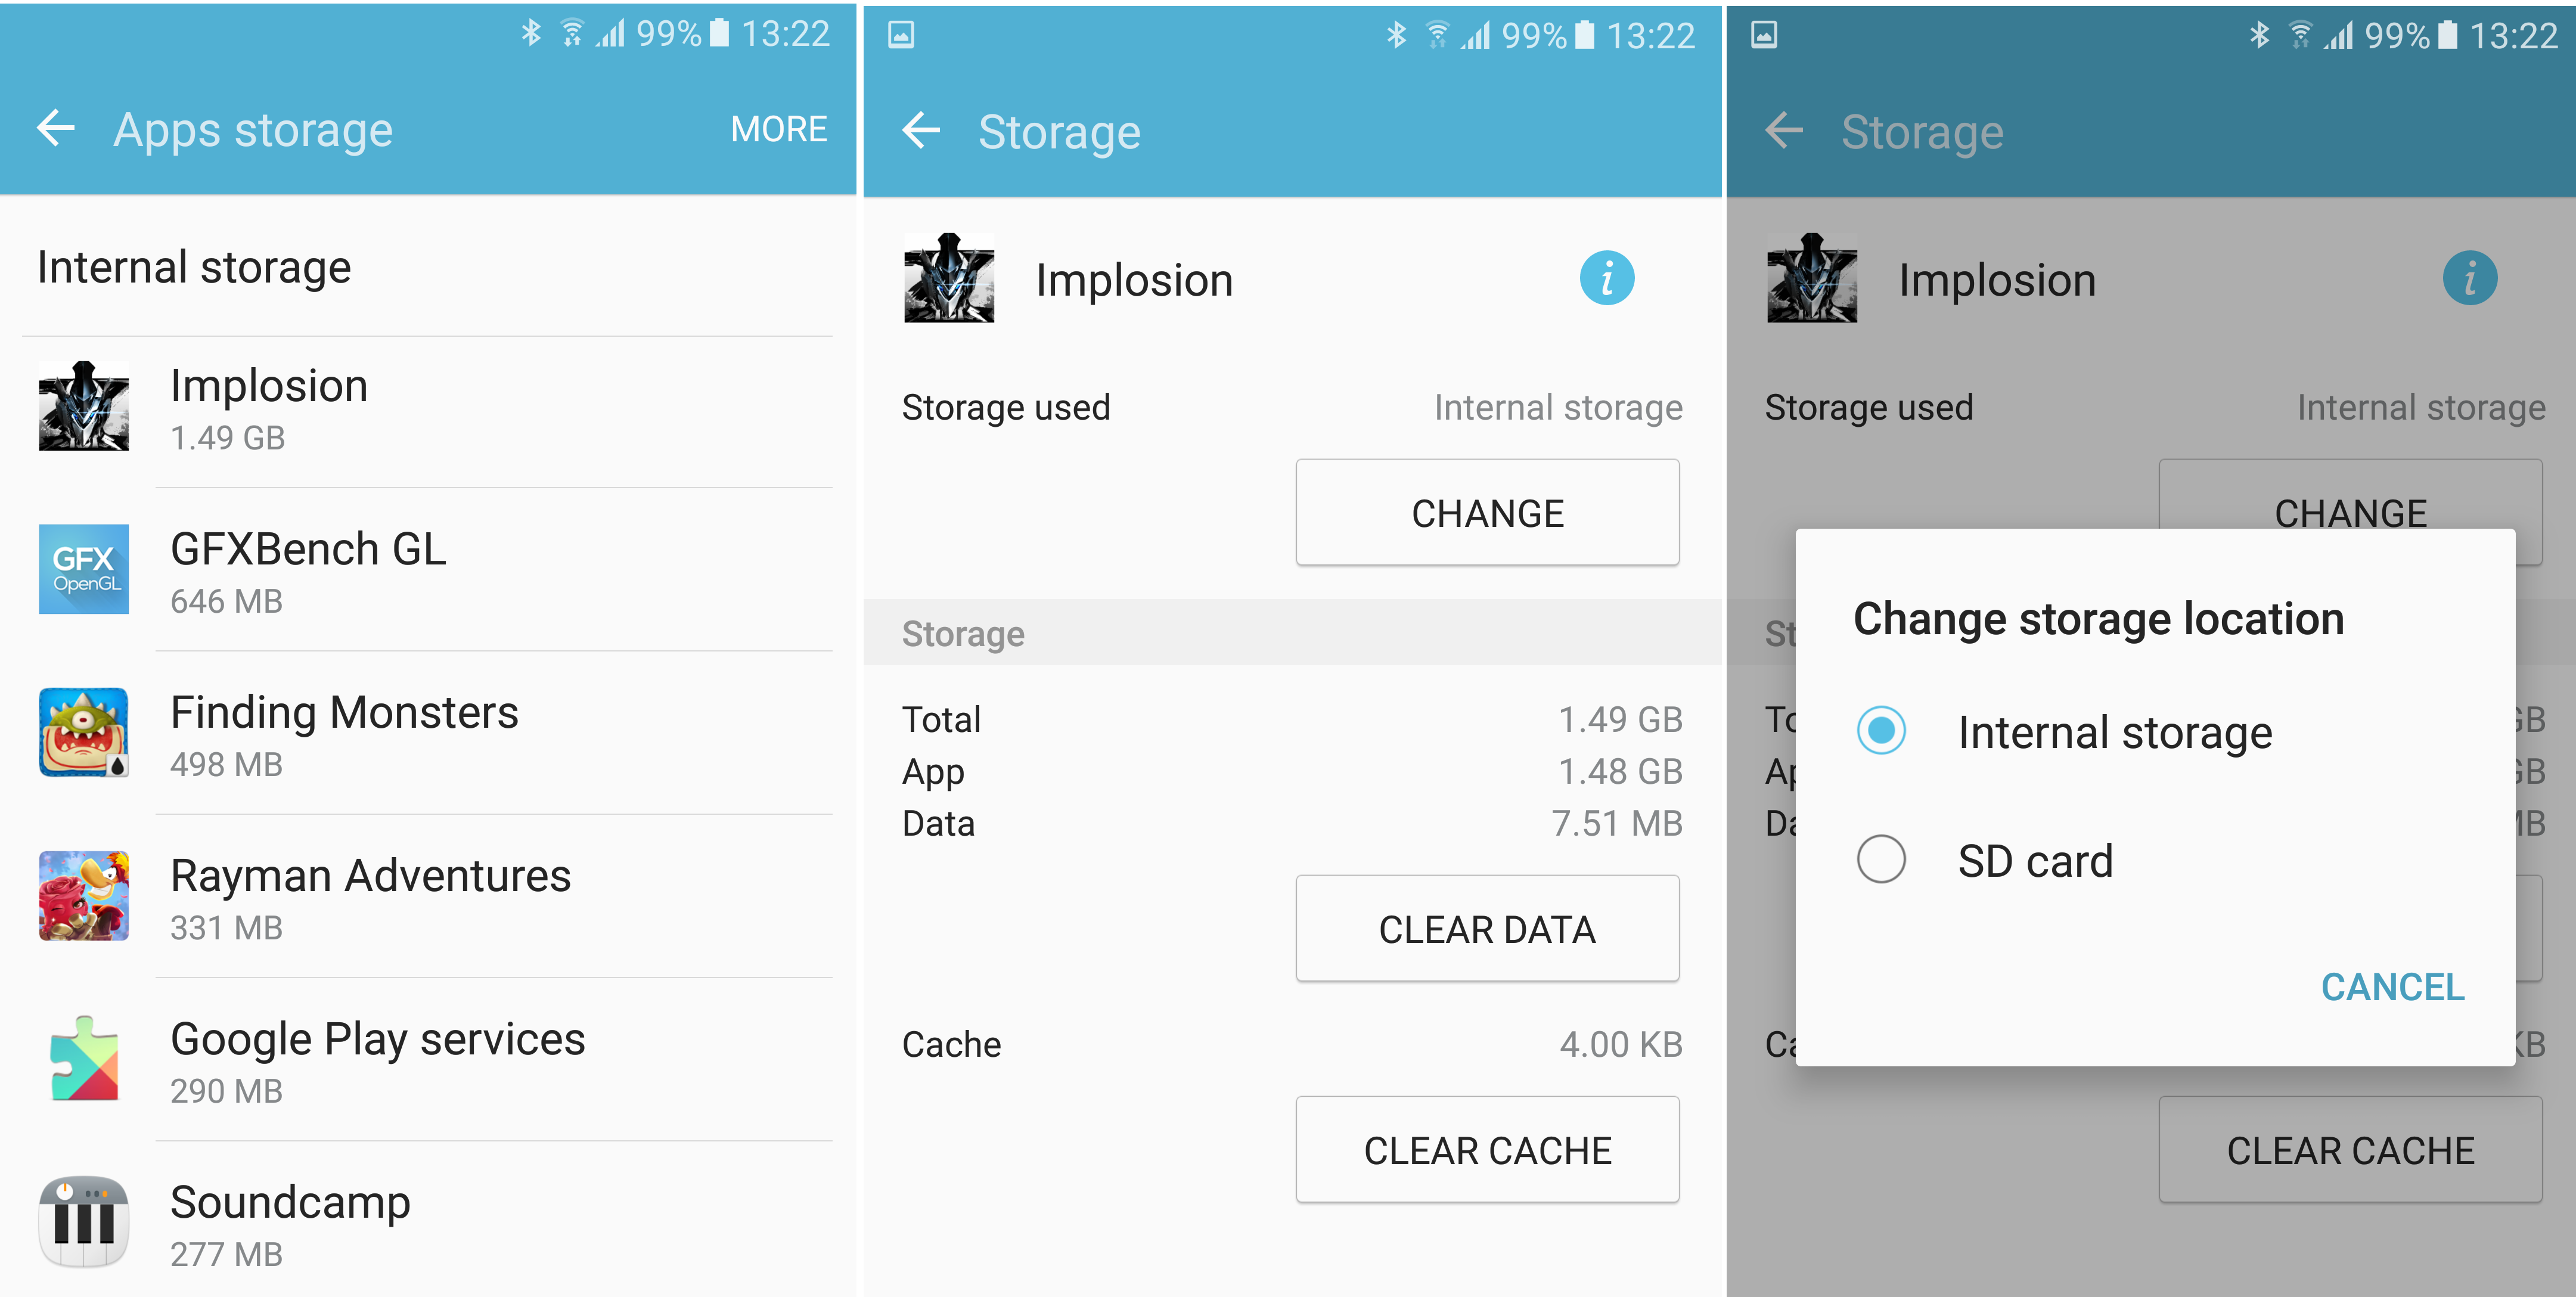 How to free storage by moving apps to the microSD memory card on your Galaxy S7 or S7 edge